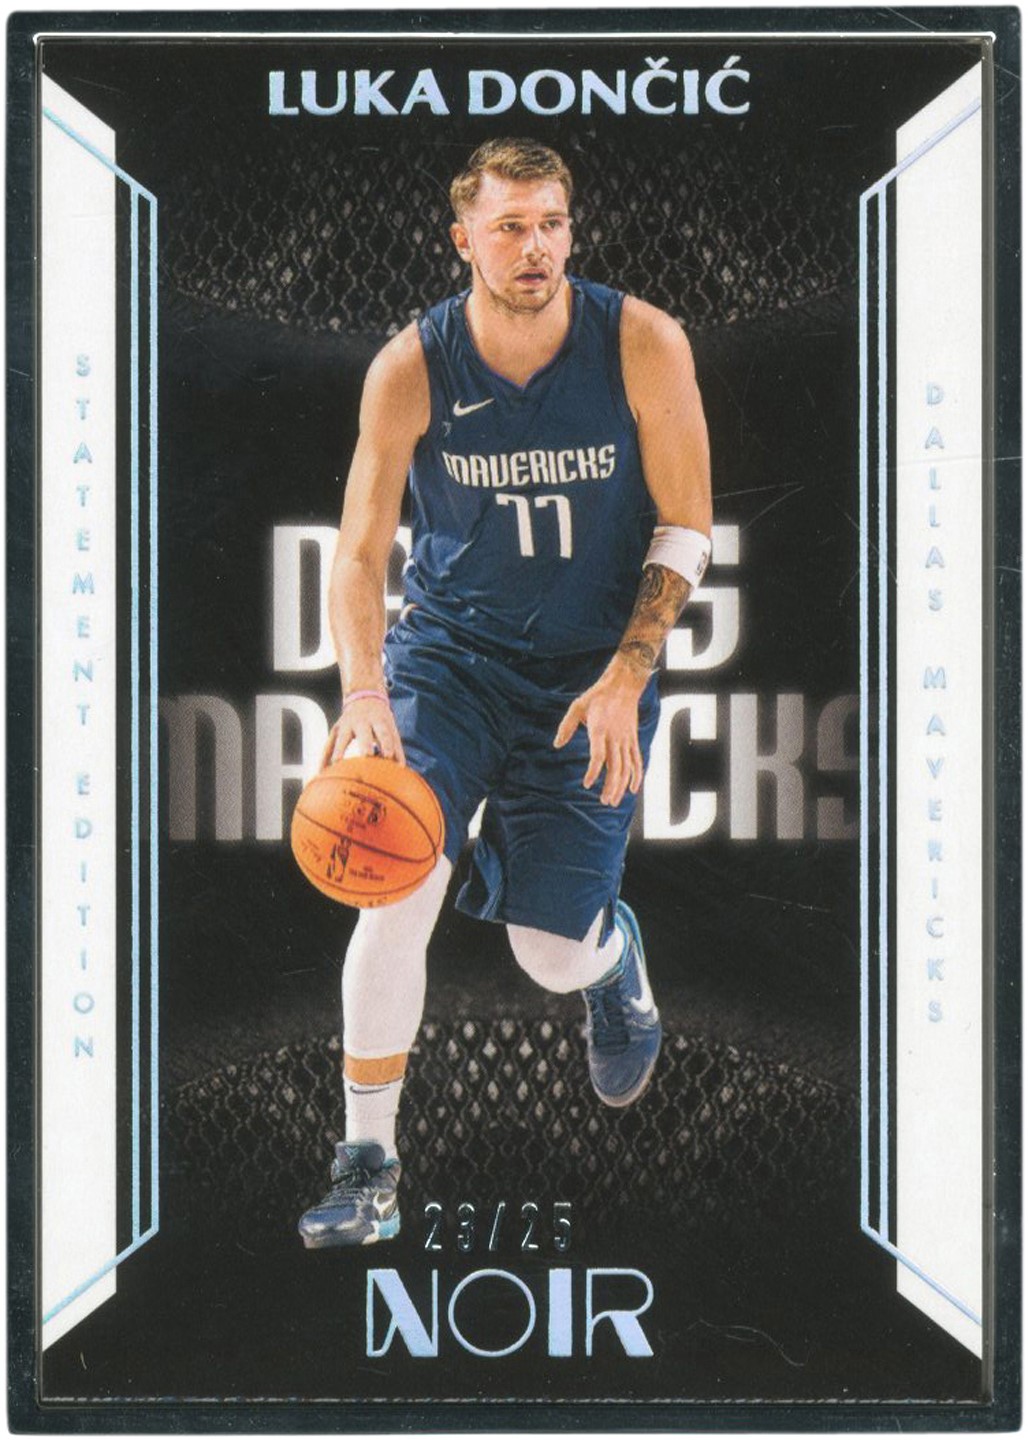 - 2019-20 Panini Noir Statement Edition Silver Frame #210 Luka Doncic 23/25